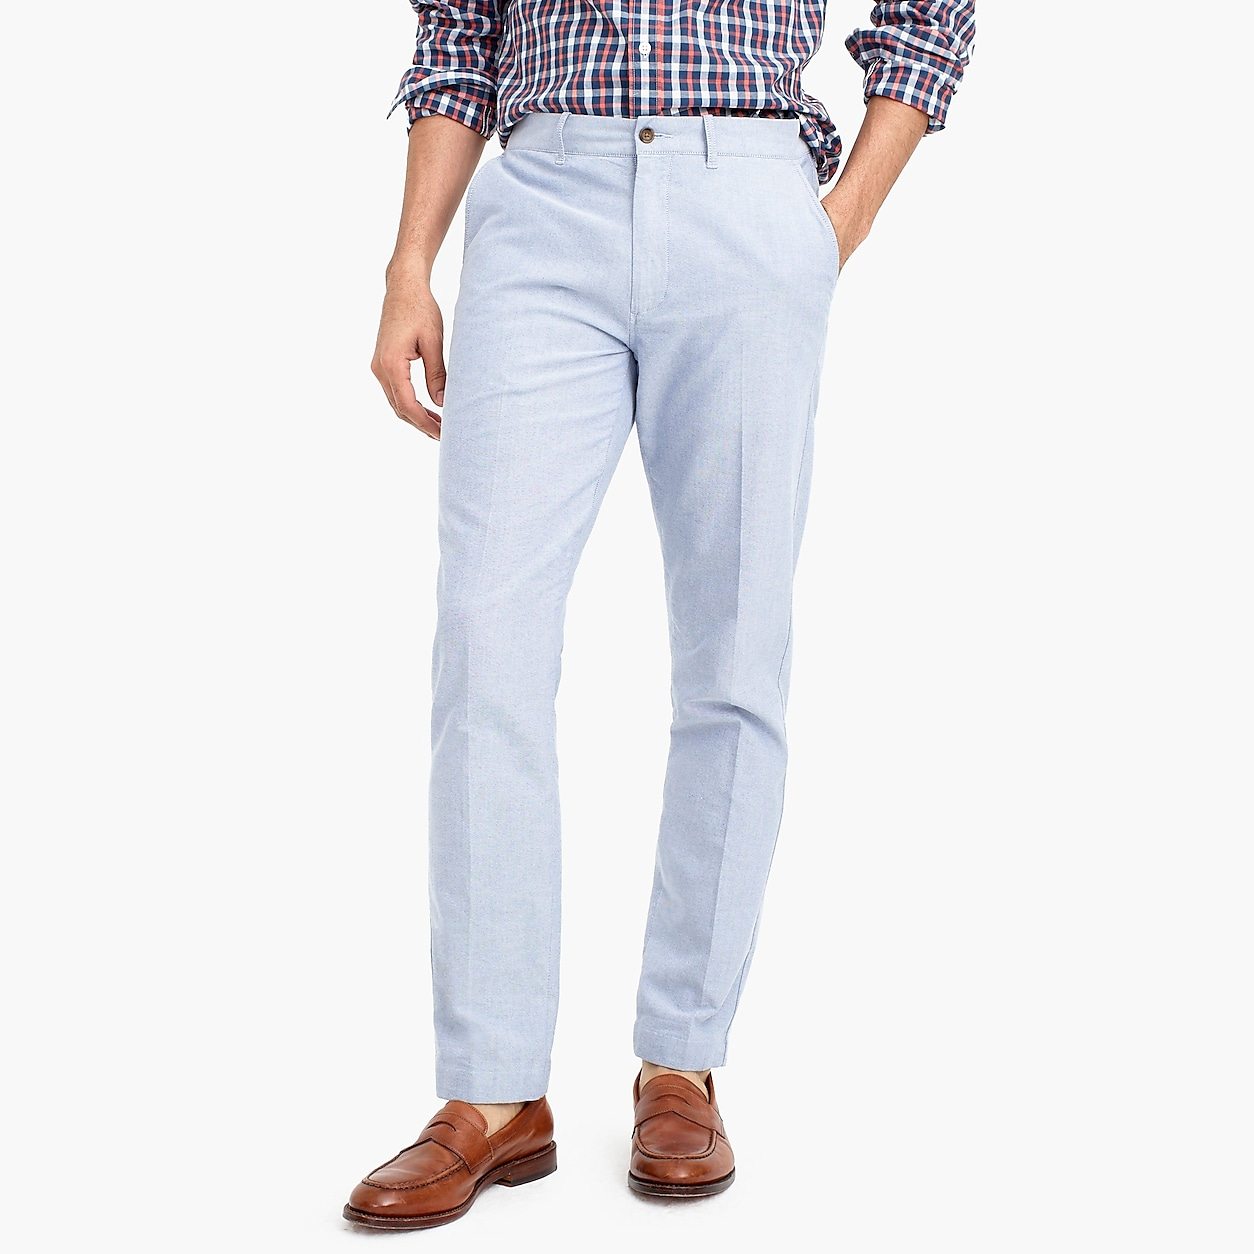 Sutton straight-fit pant in Oxford cloth